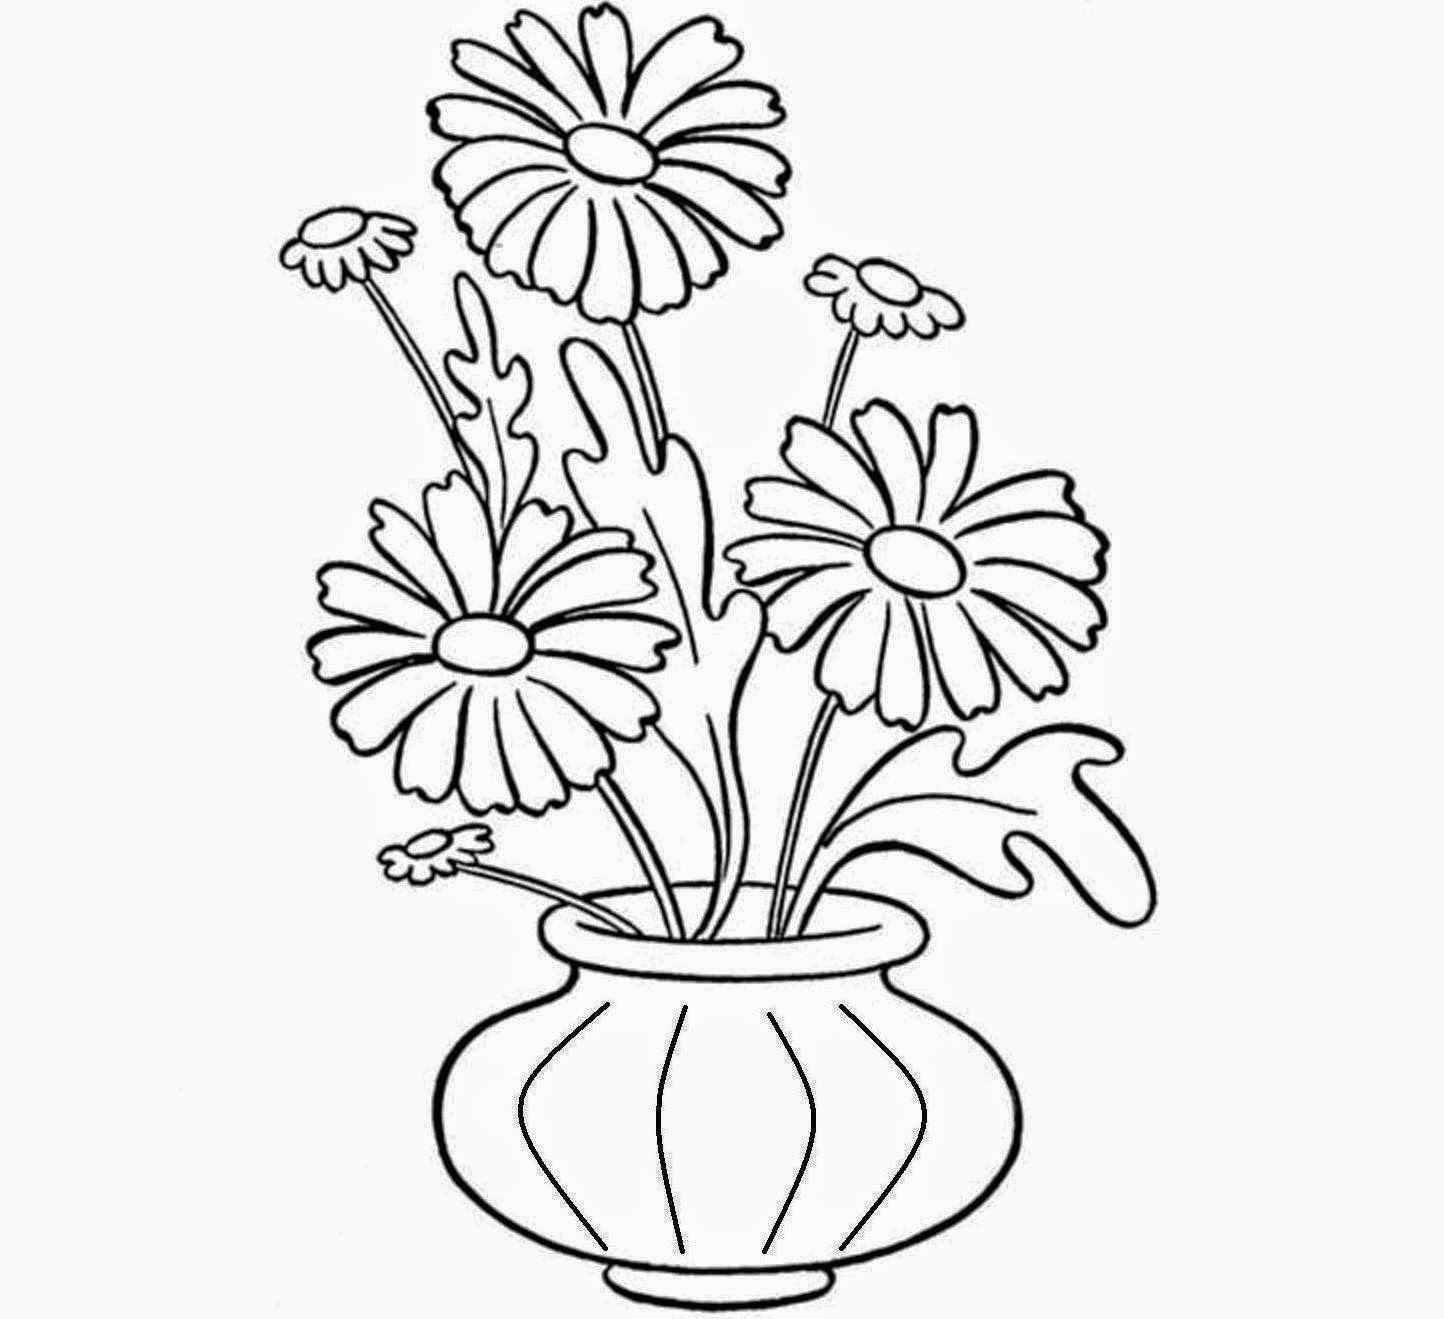 Drawing Of Easy Flower Pot Mind Blowing Tips Vases Vintage Glass Vases Garden Center Pieces